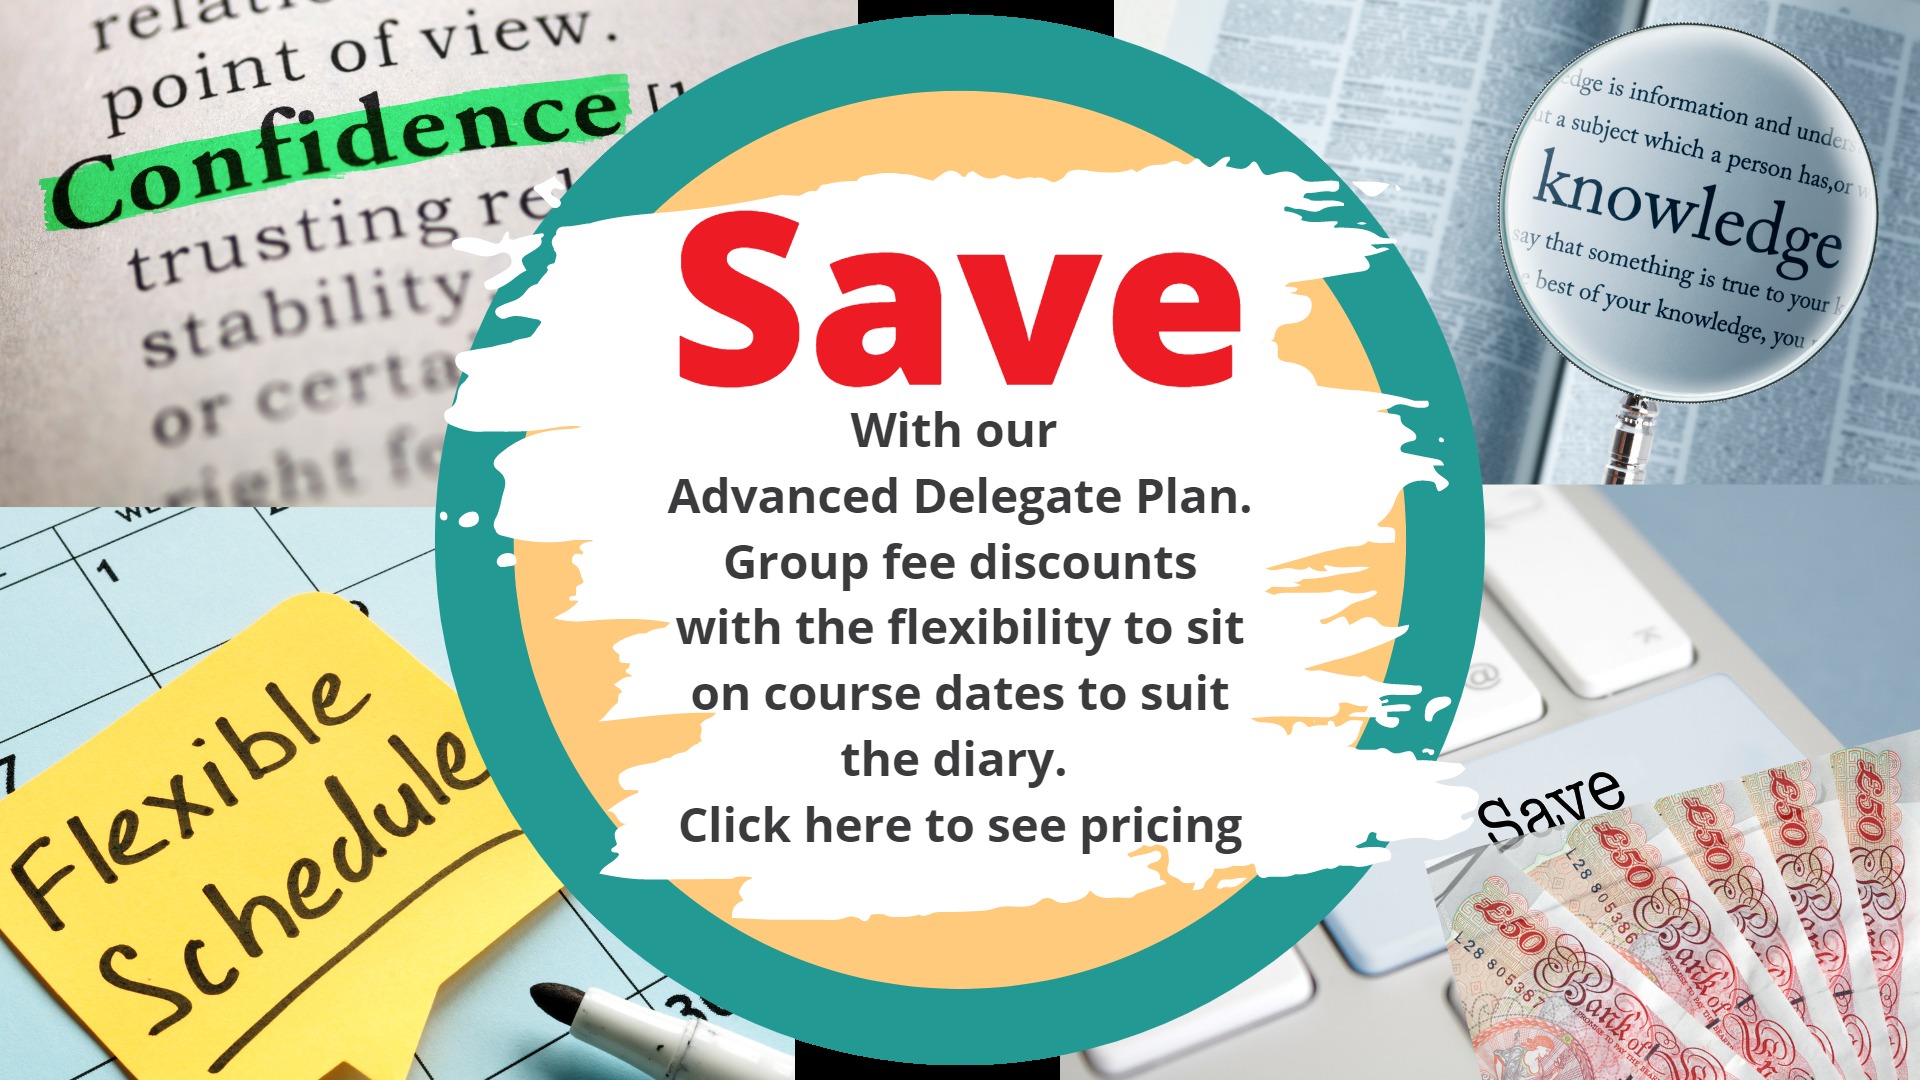 Save with our Advanced Delegate plan from £170 to £275 per person dependant on your total numbers. Click here for pricing.